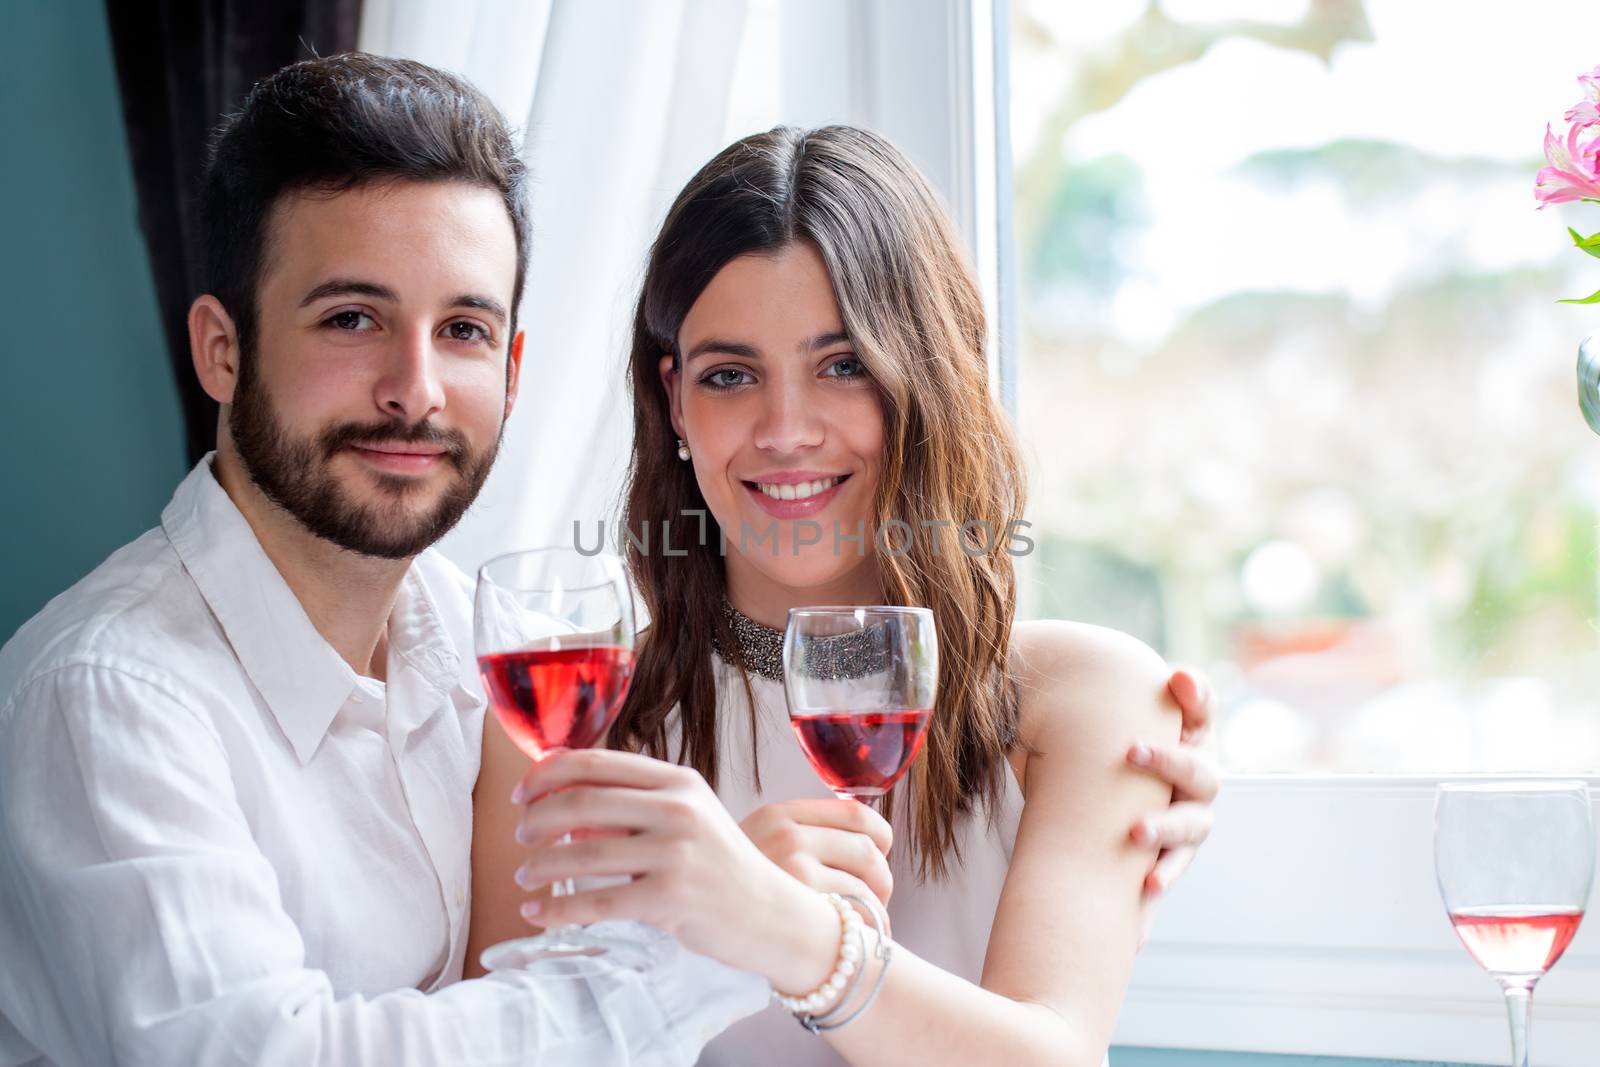 Close up portrait of young couple holding wine glasses on date in restaurant.